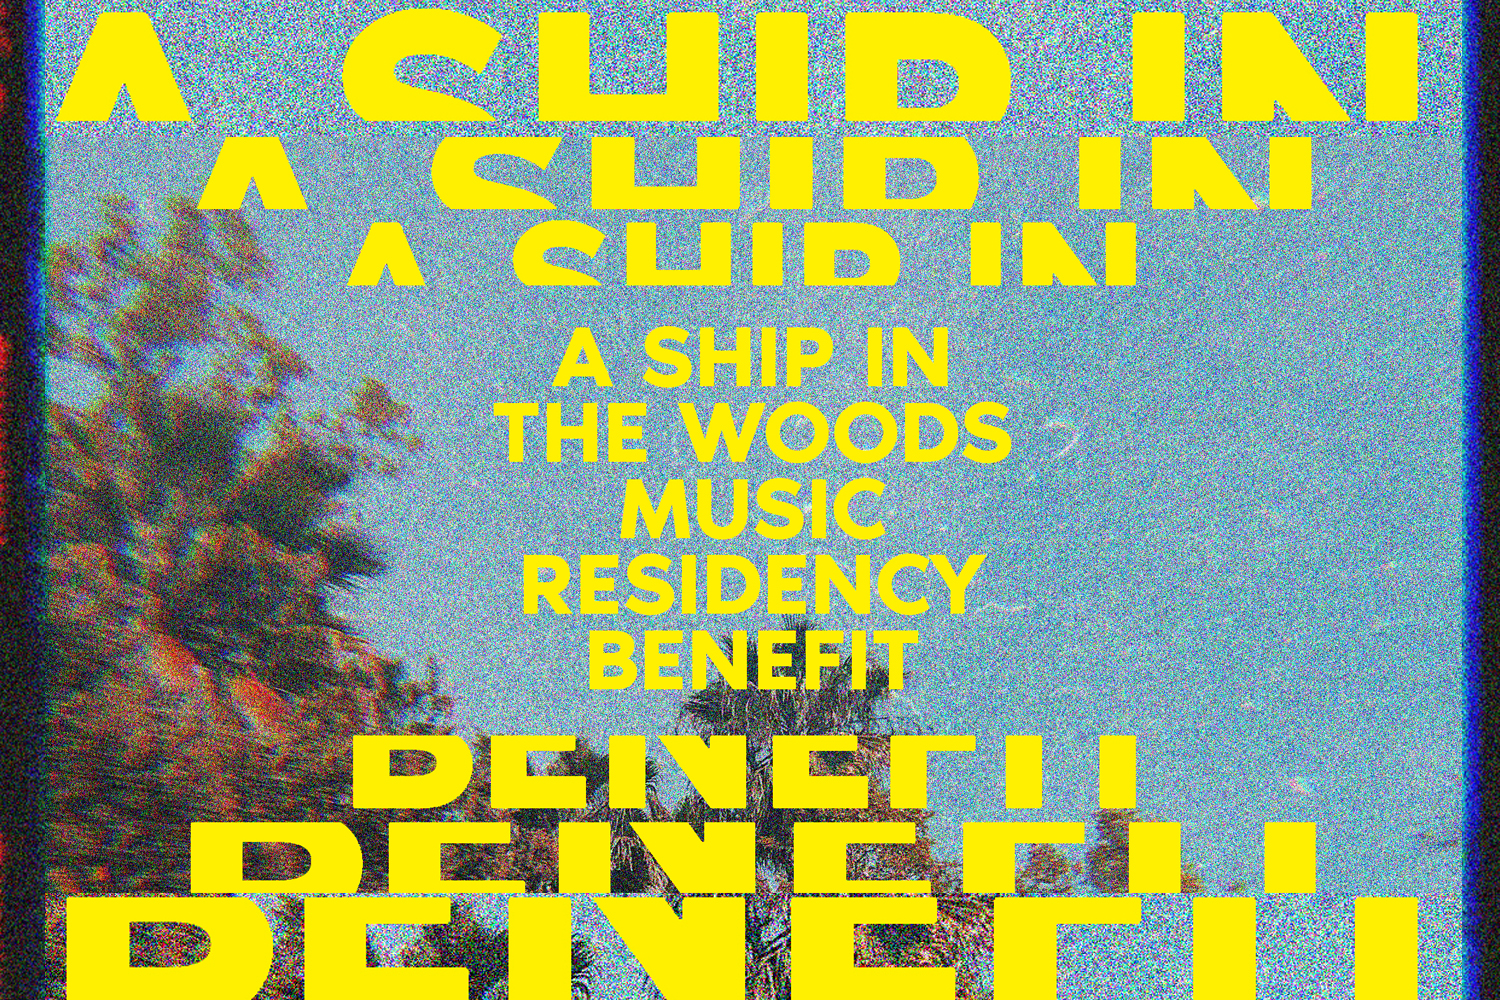 A SHIP IN THE WOODS MUSIC RESIDENCY BENEFIT